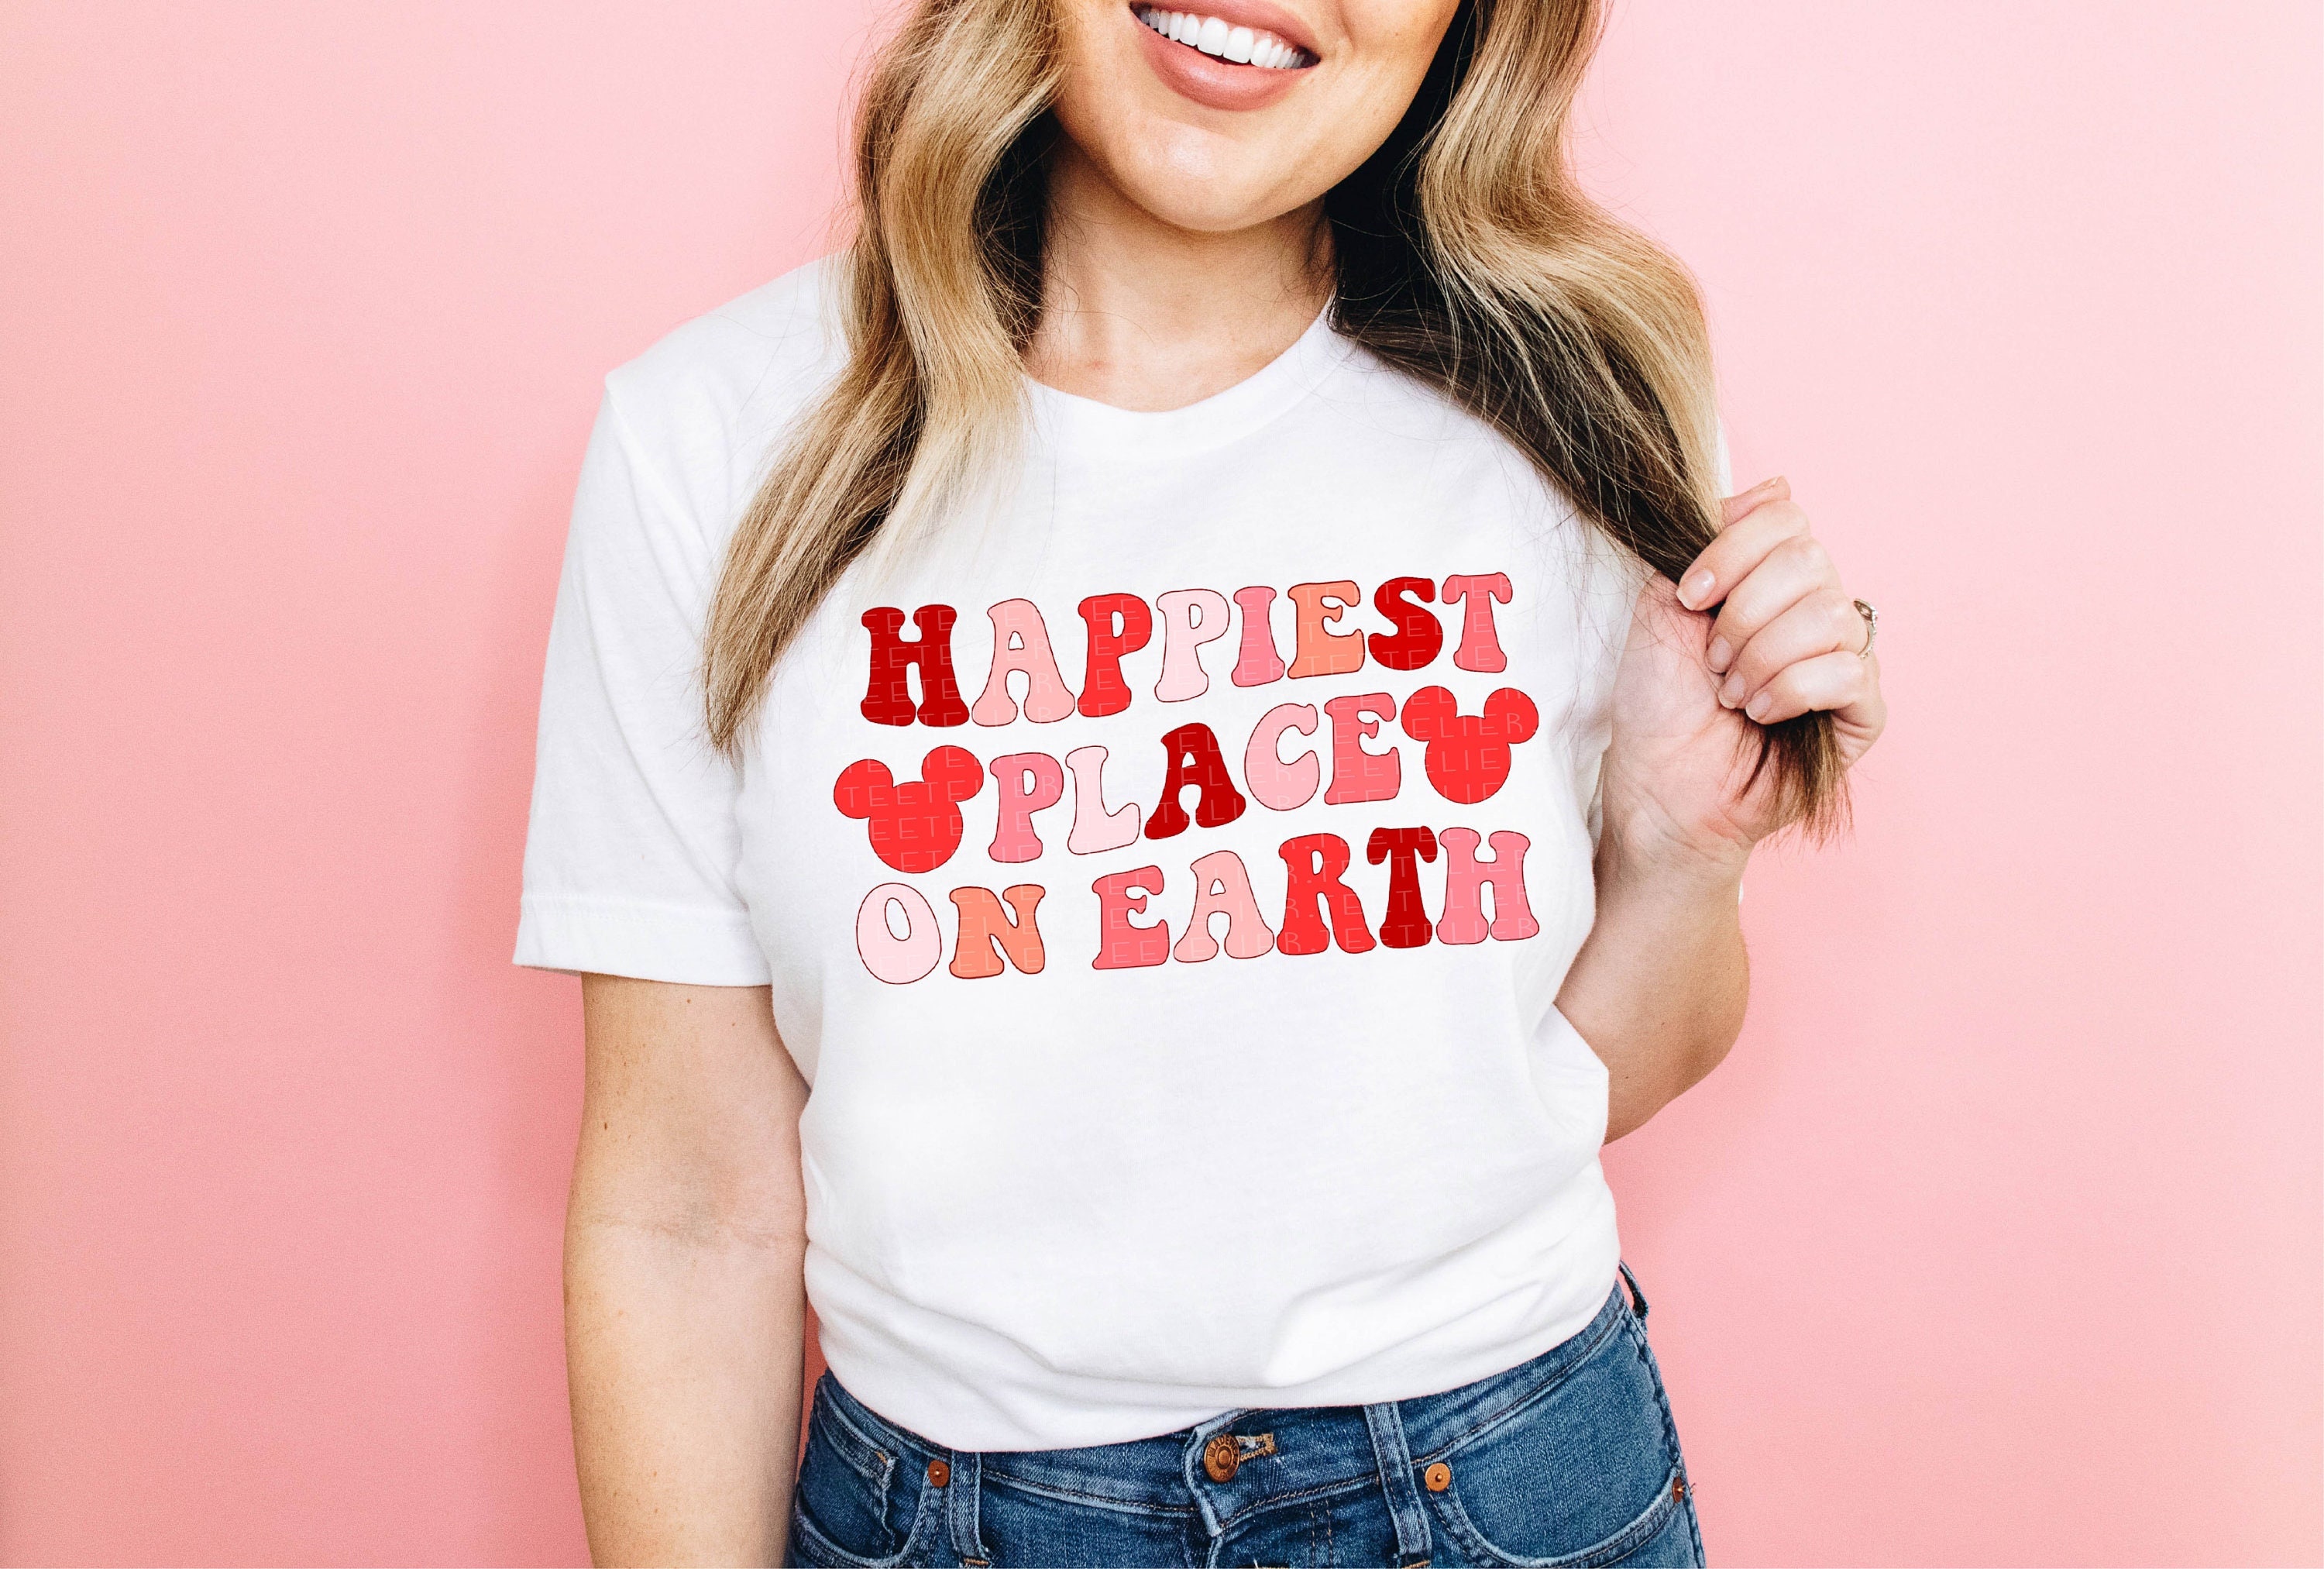 Discover Happiest Place On Earth Shirt, Valentines Day Shirts